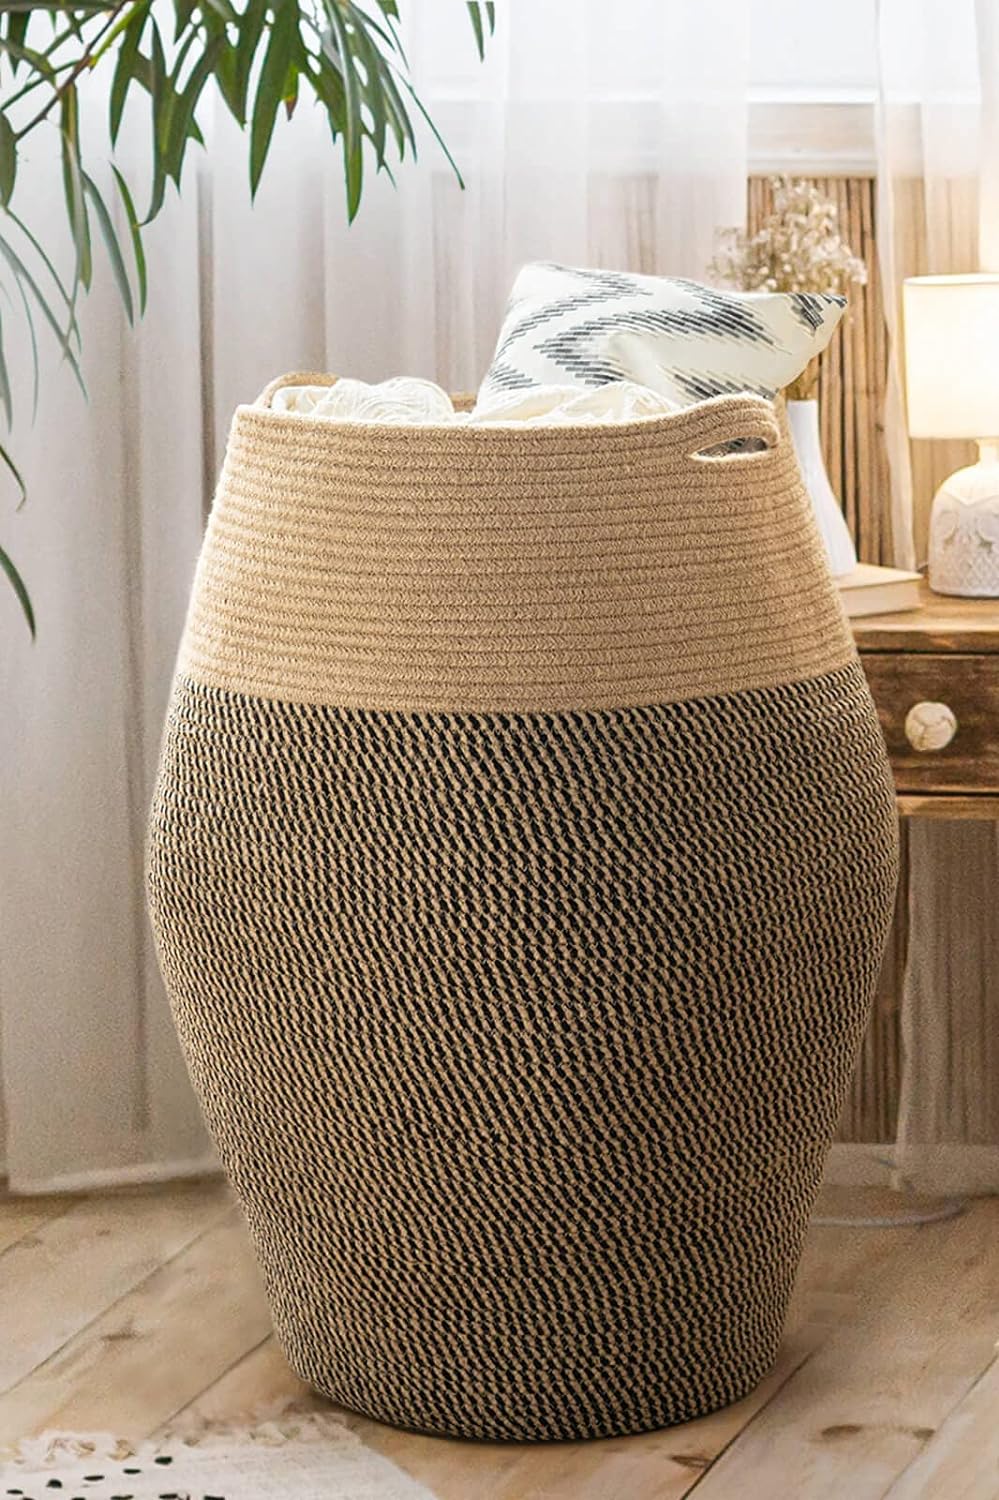 Goodpick Tall Laundry Hamper | Woven Jute Rope Dirty Clothes Hamper Modern Hamper Basket Large in Laundry Room, 25.6 Height